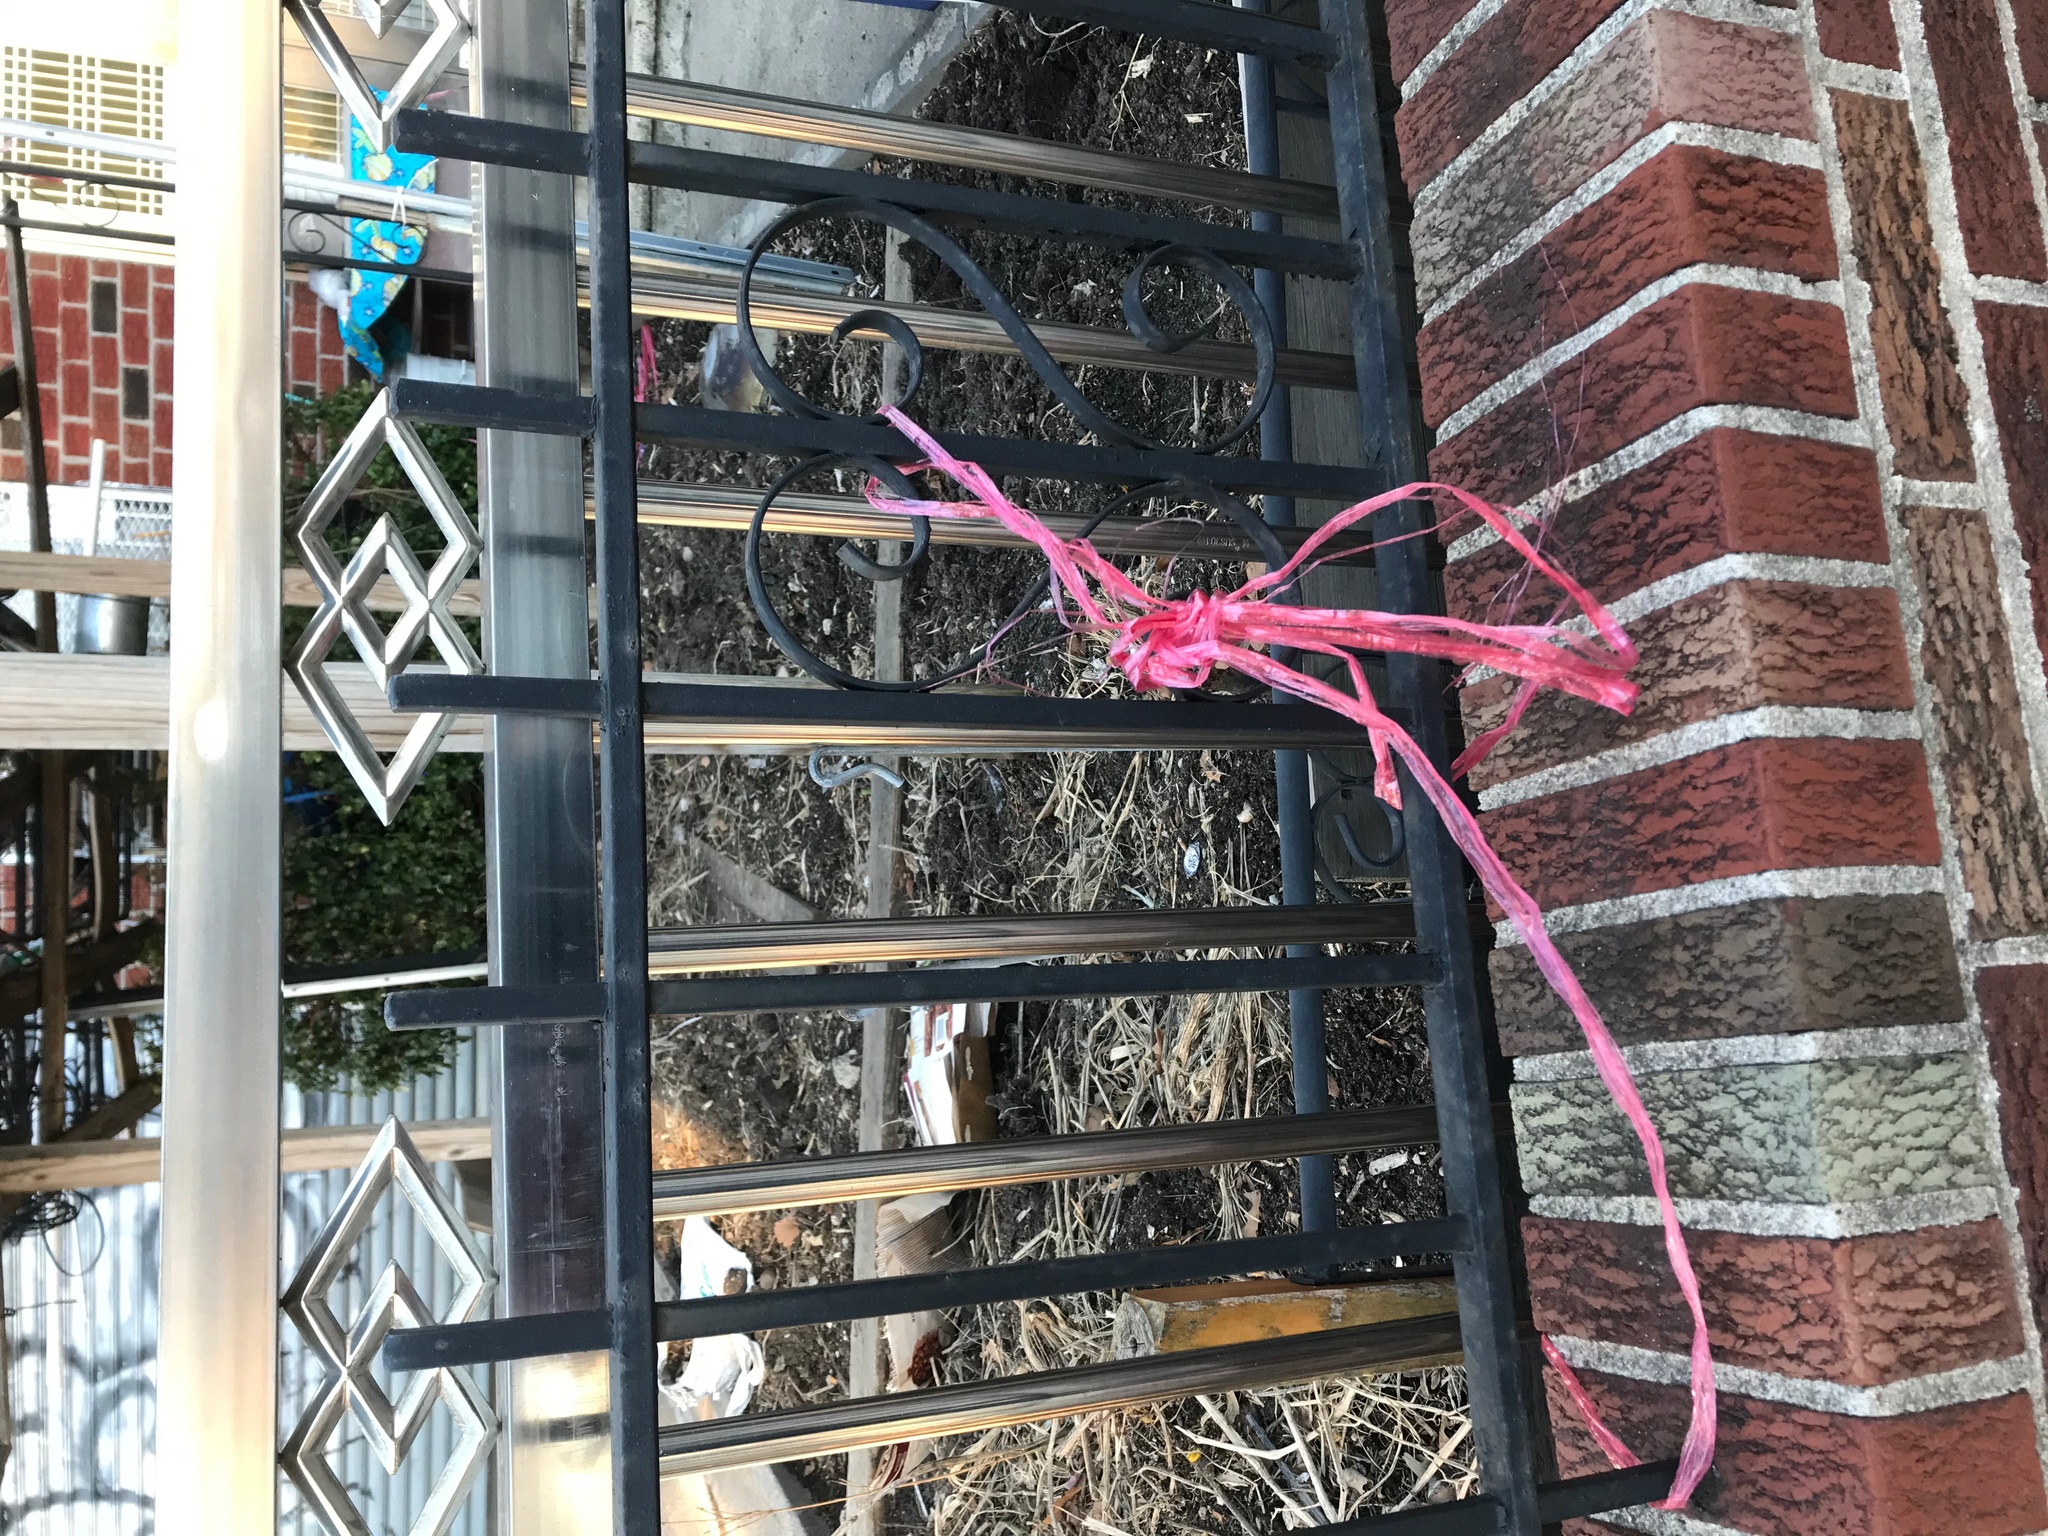 A black wrought iron railing with a stainless steel railing behind it. A piece of pink plastic ribbon is haphazardly tied to the black railing. 